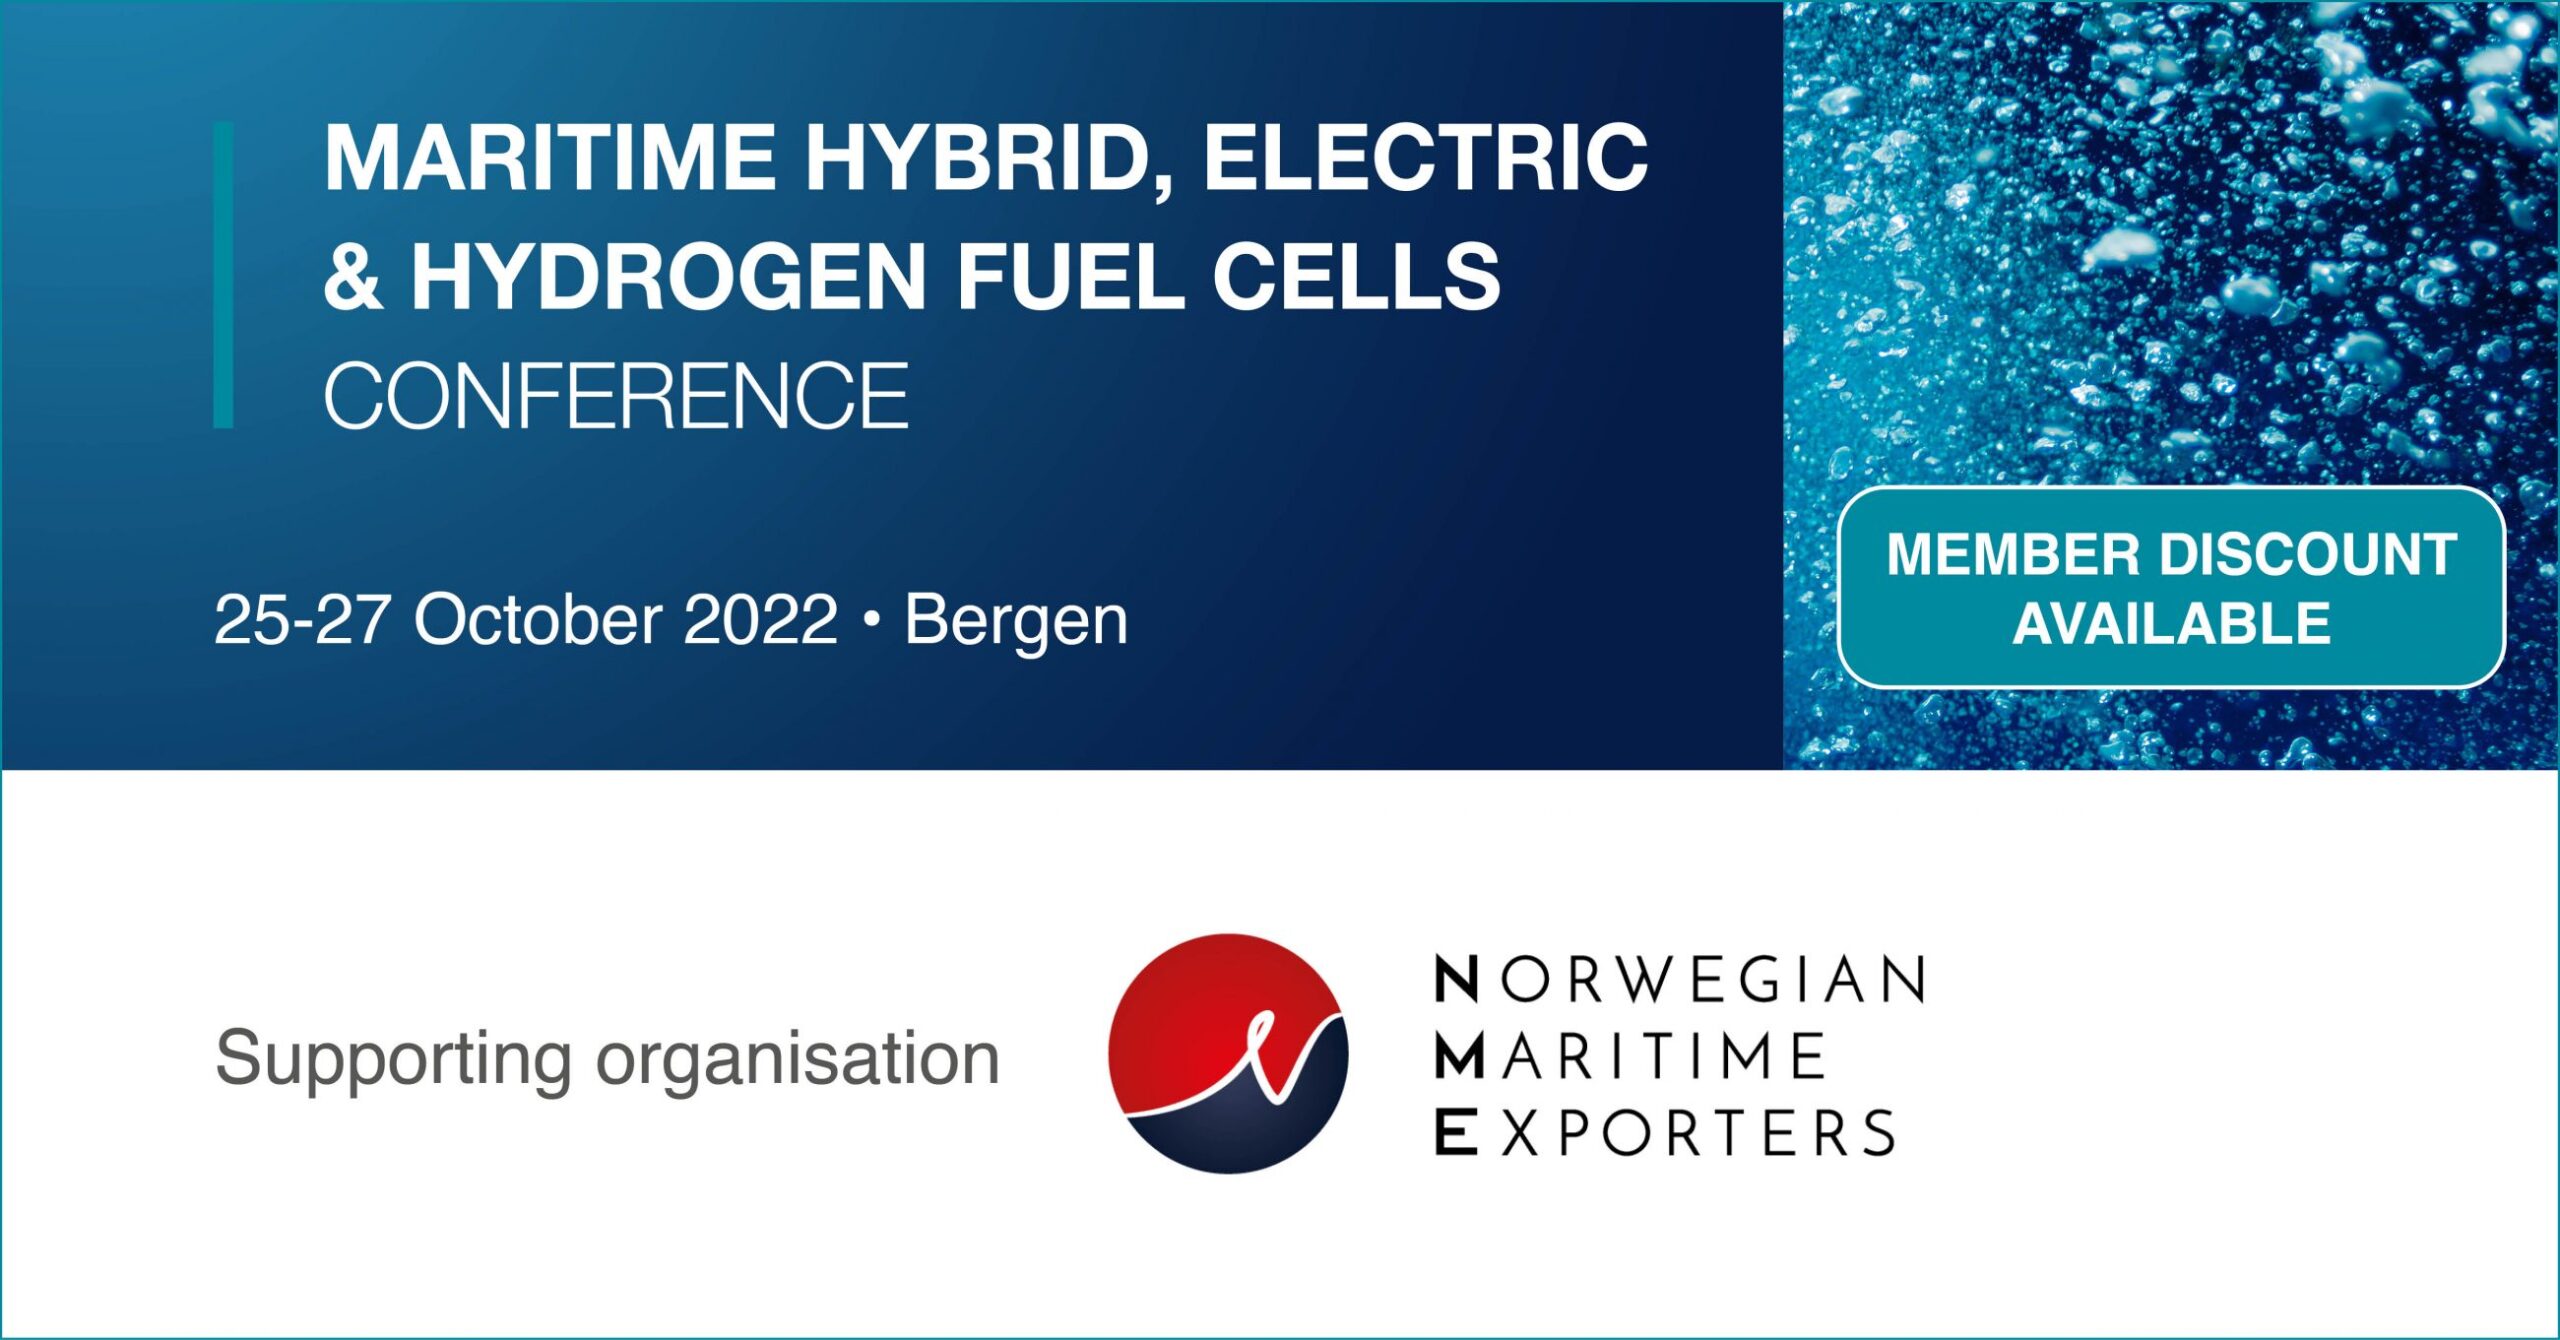 Maritime Hybrid Electric & Hydrogen Fuel Cells conference email banner